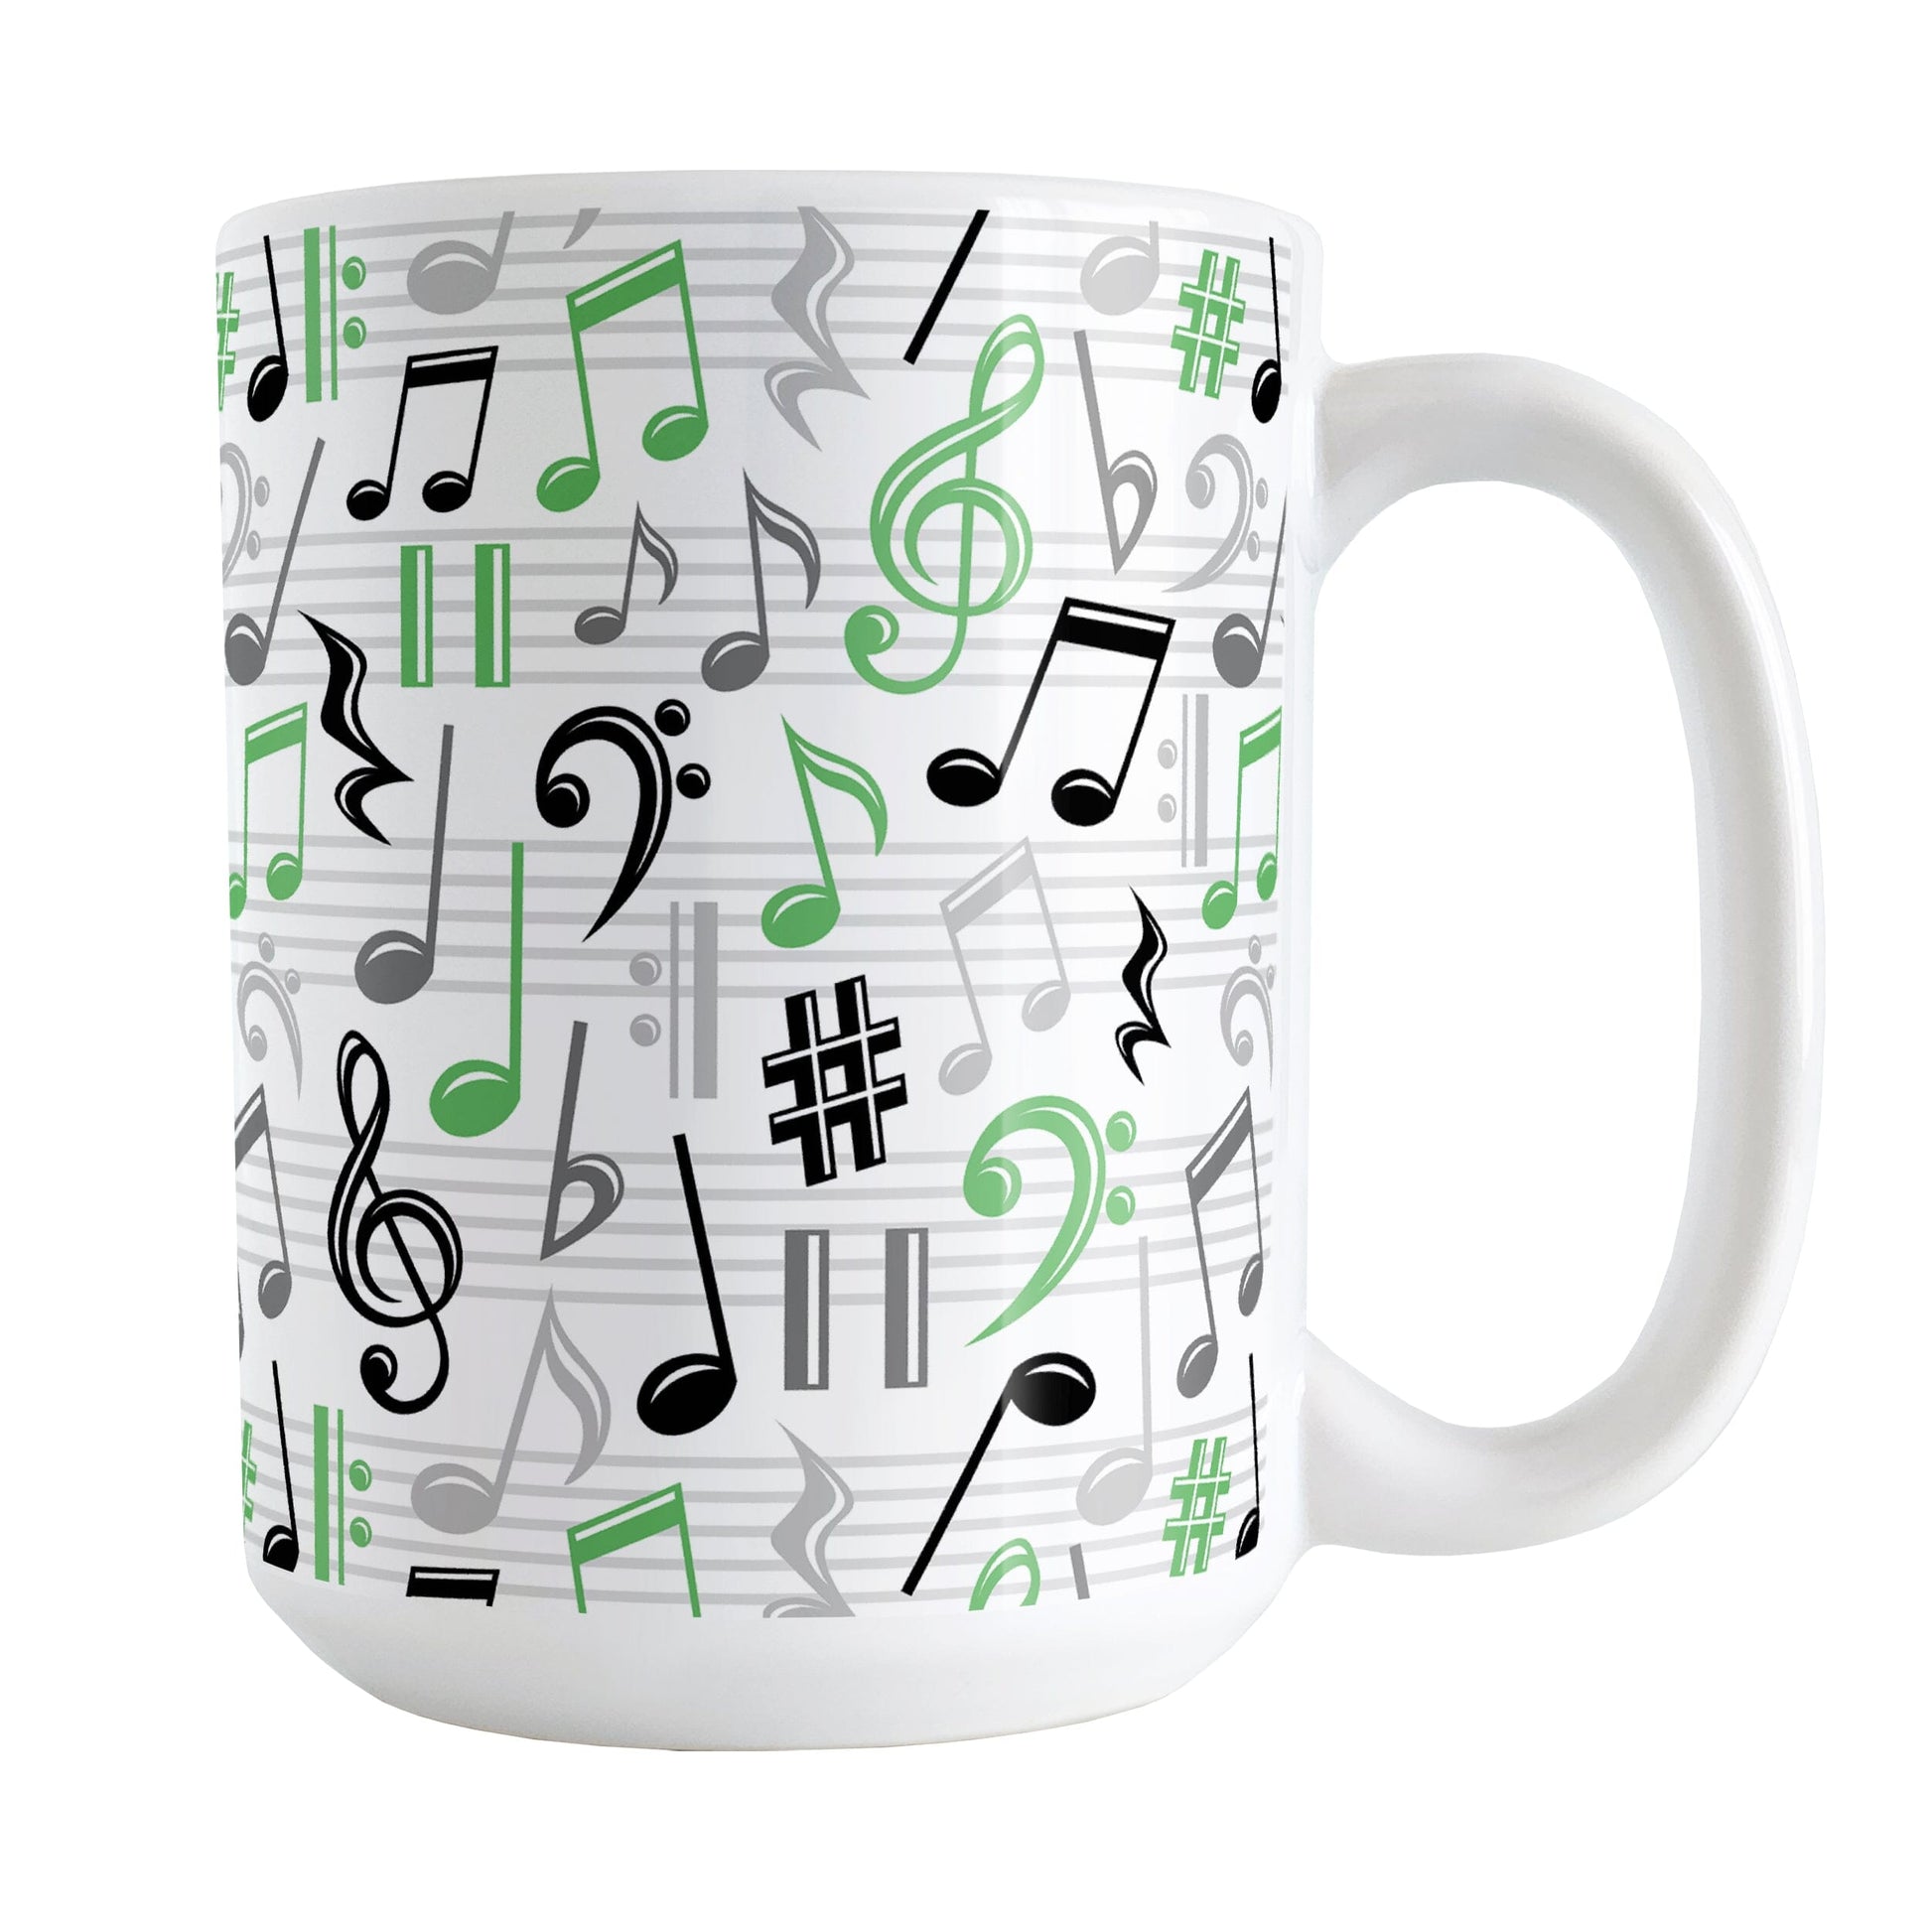 Green Music Notes Pattern Mug (15oz) at Amy's Coffee Mugs. A ceramic coffee mug designed with music notes and symbols in green, black, and gray in a pattern that wraps around the mug to the handle.